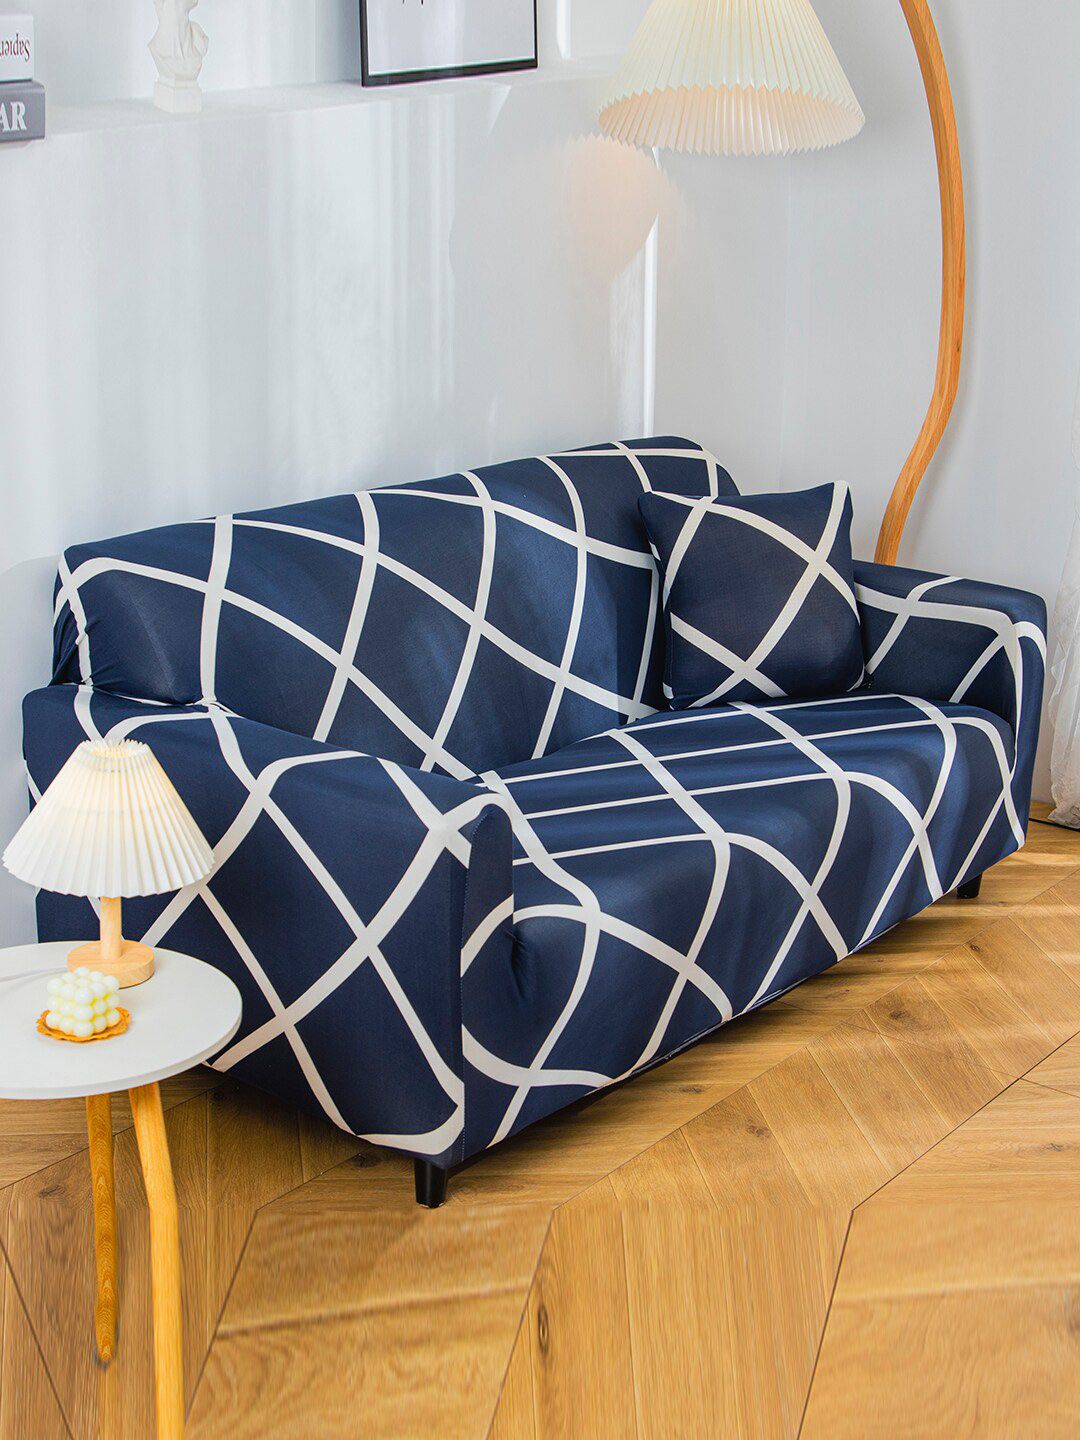 HOUSE OF QUIRK Navy Blue & White Printed 2-Seater Stretchable Non-Slip Sofa Cover Price in India